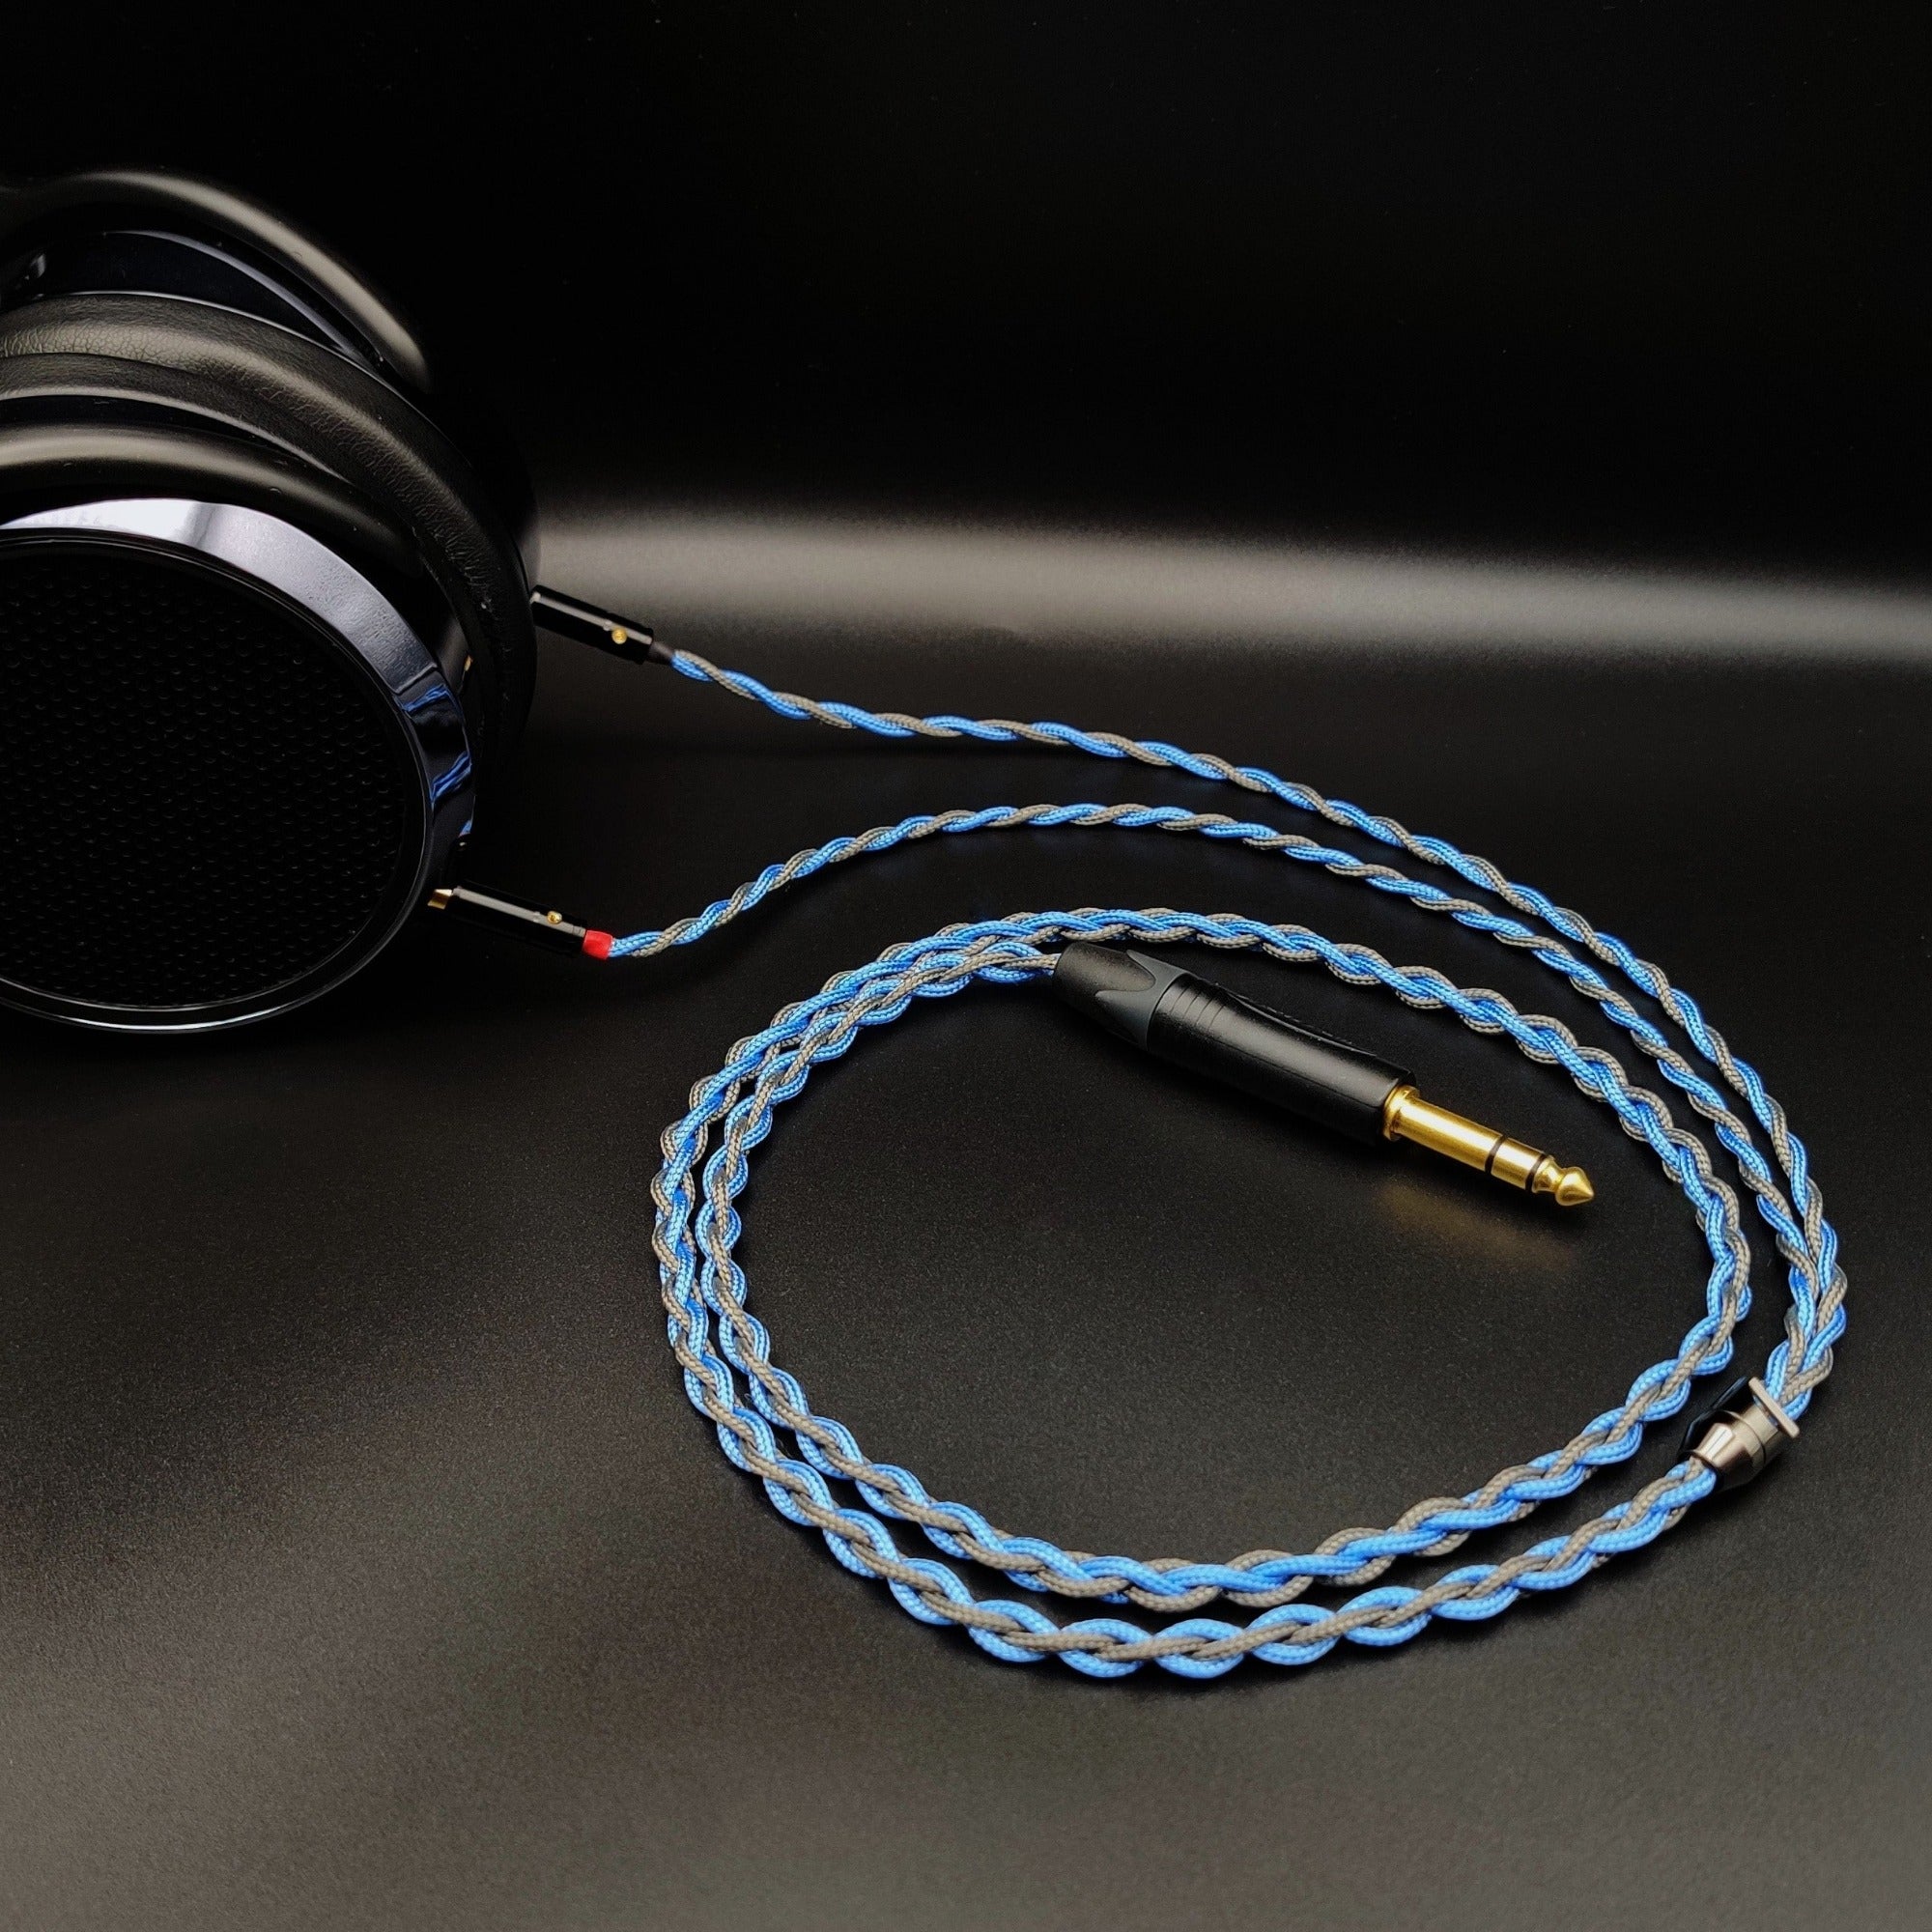 Dual 3.5mm Headphone Cable - Braided sleeved – SkyAudioCables